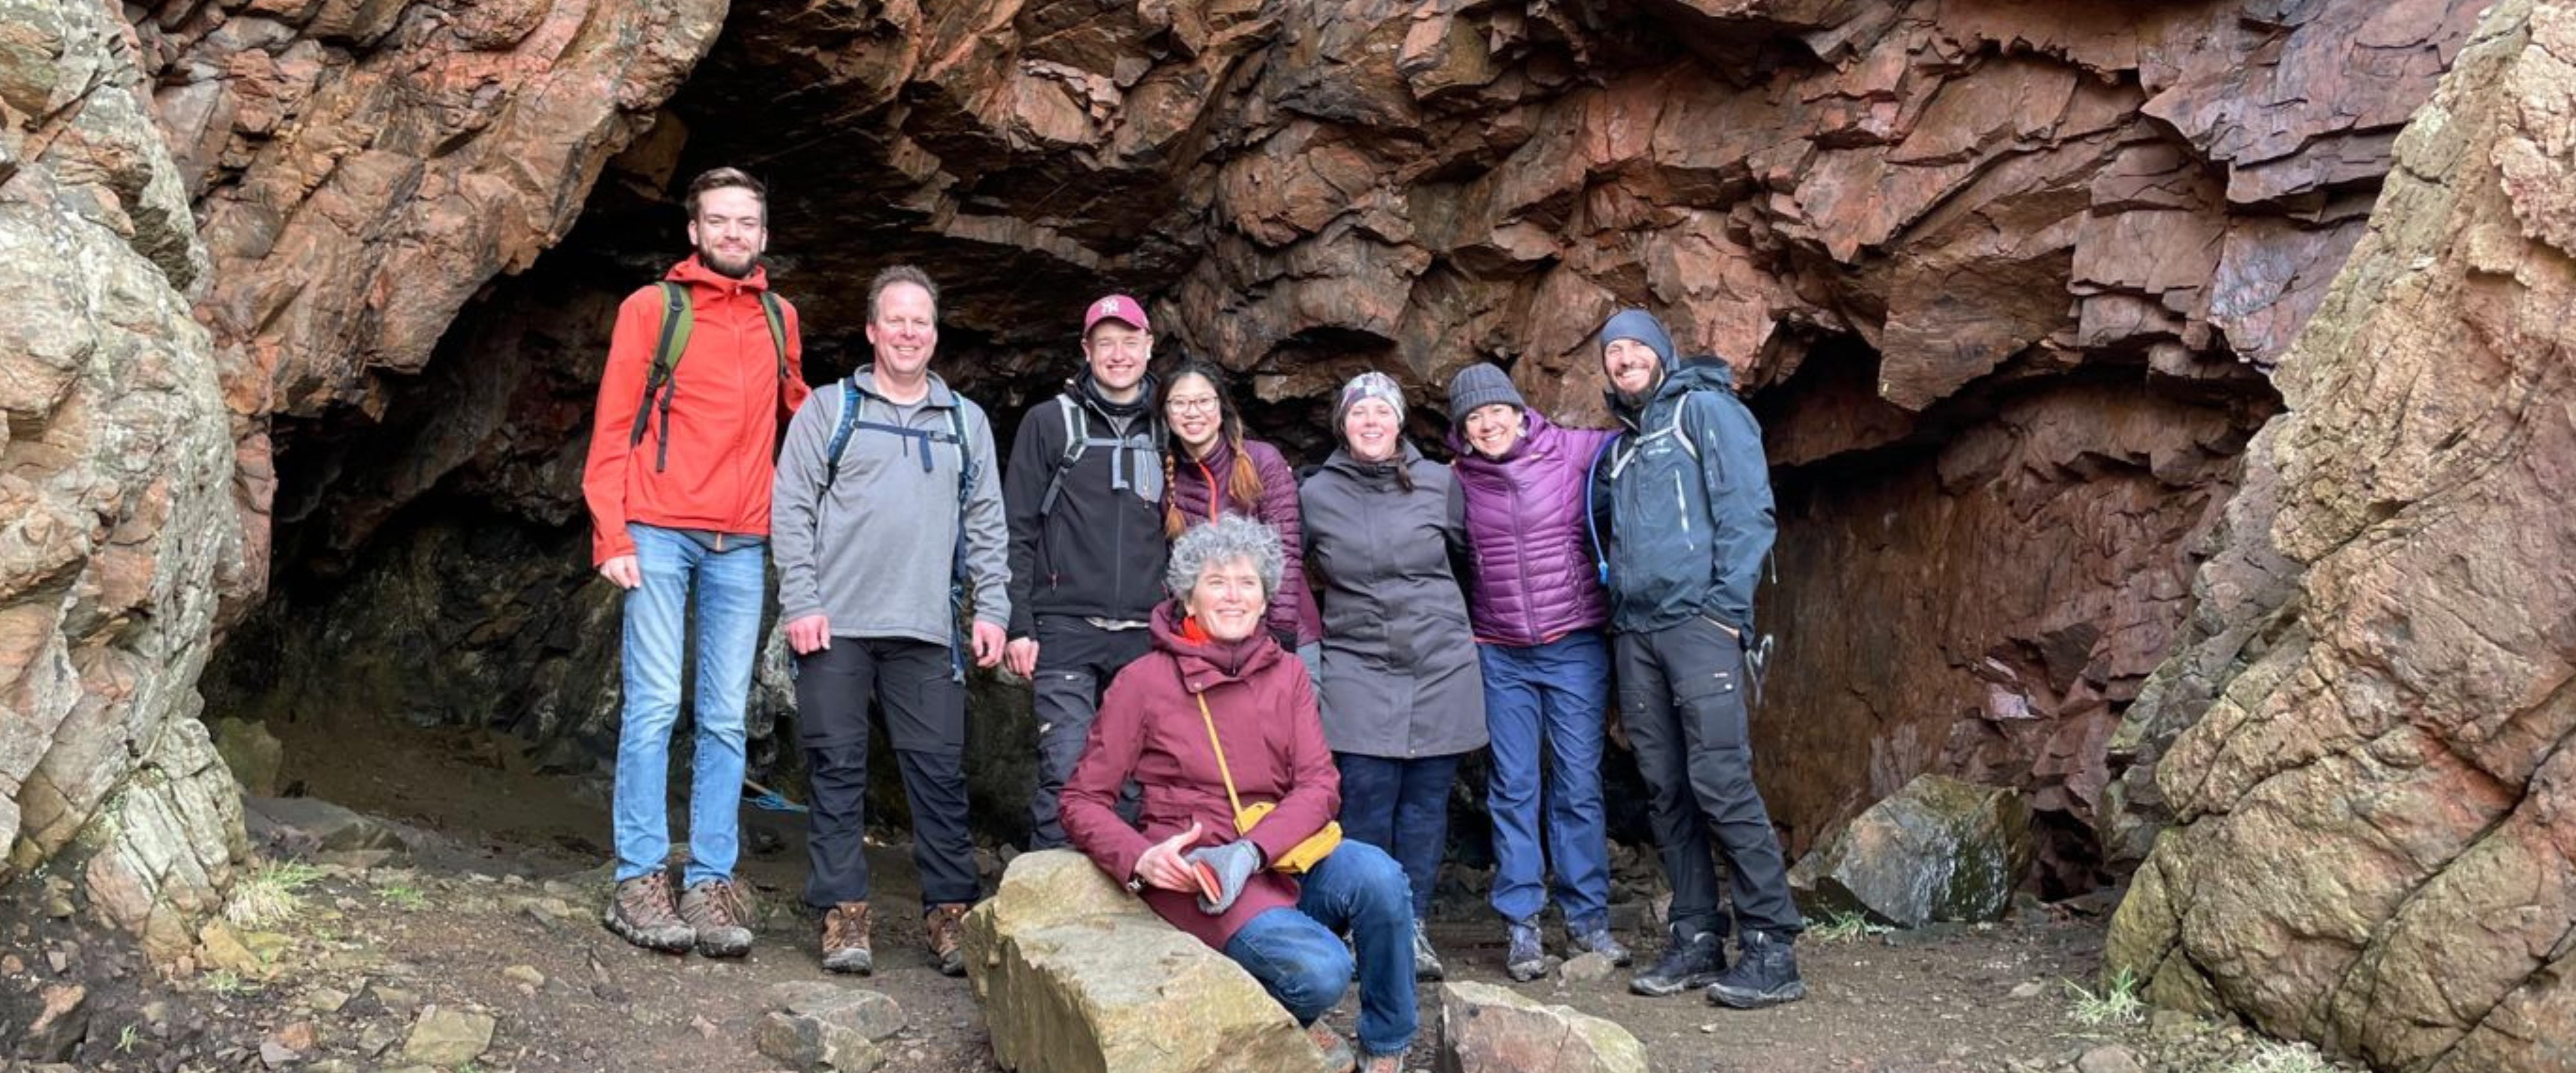 Image of group of researchers under large rock formation.